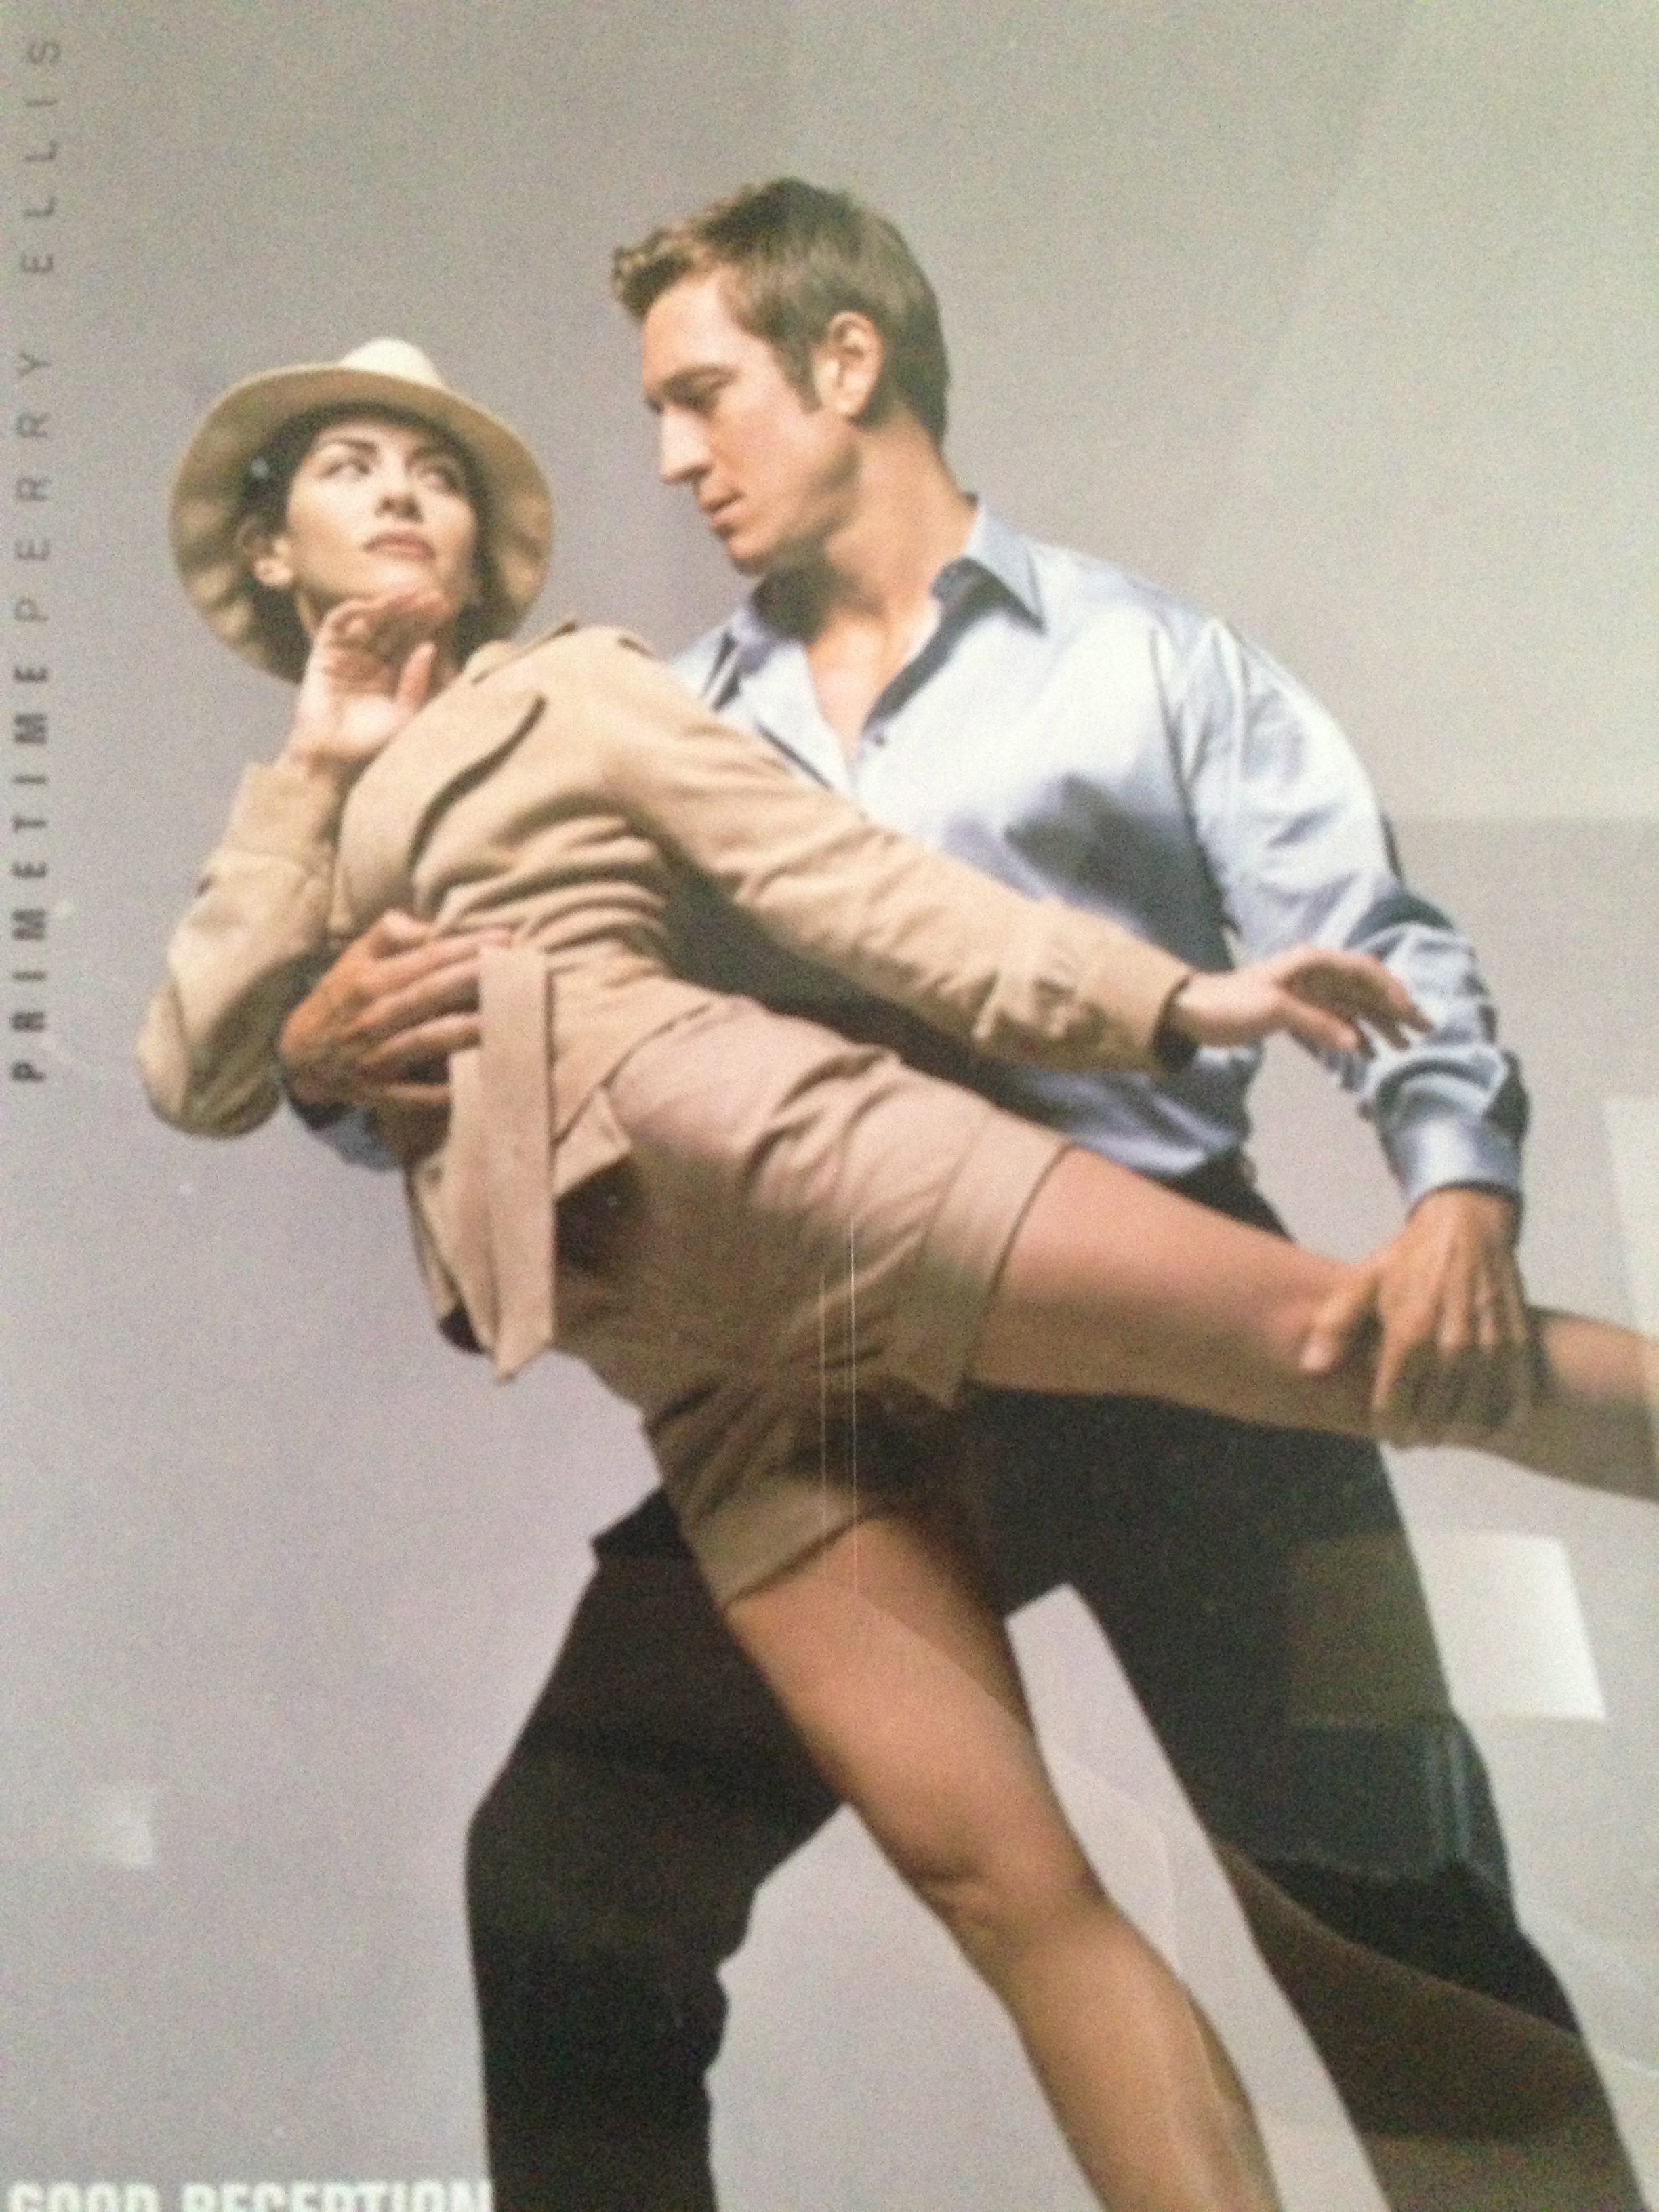 Robert Gant and Michelle Clunie from Queer as Folk for Perry Ellis/Details Magazine